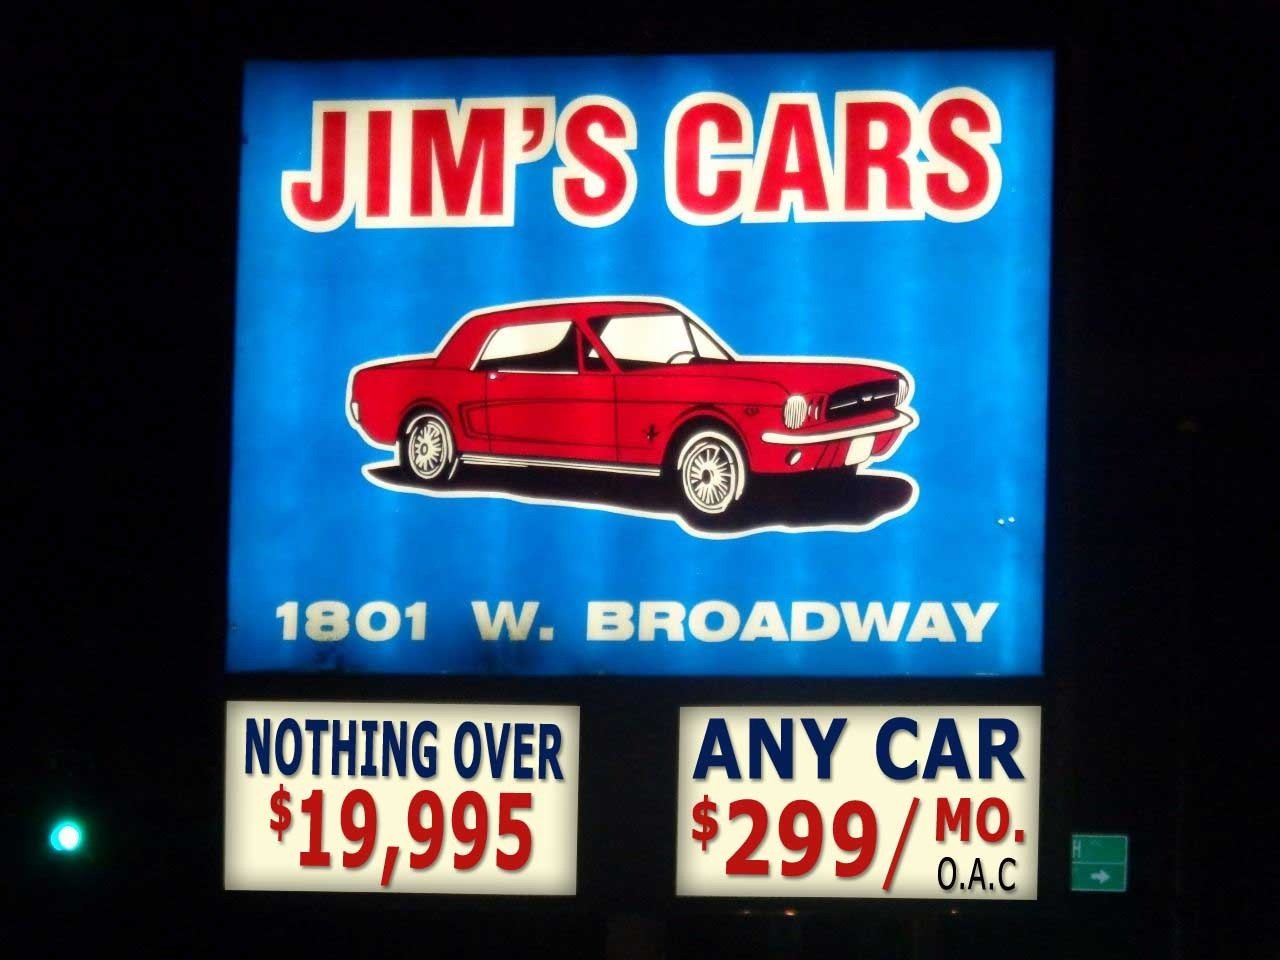 Jim's Cars by Priced-Rite Auto Sales